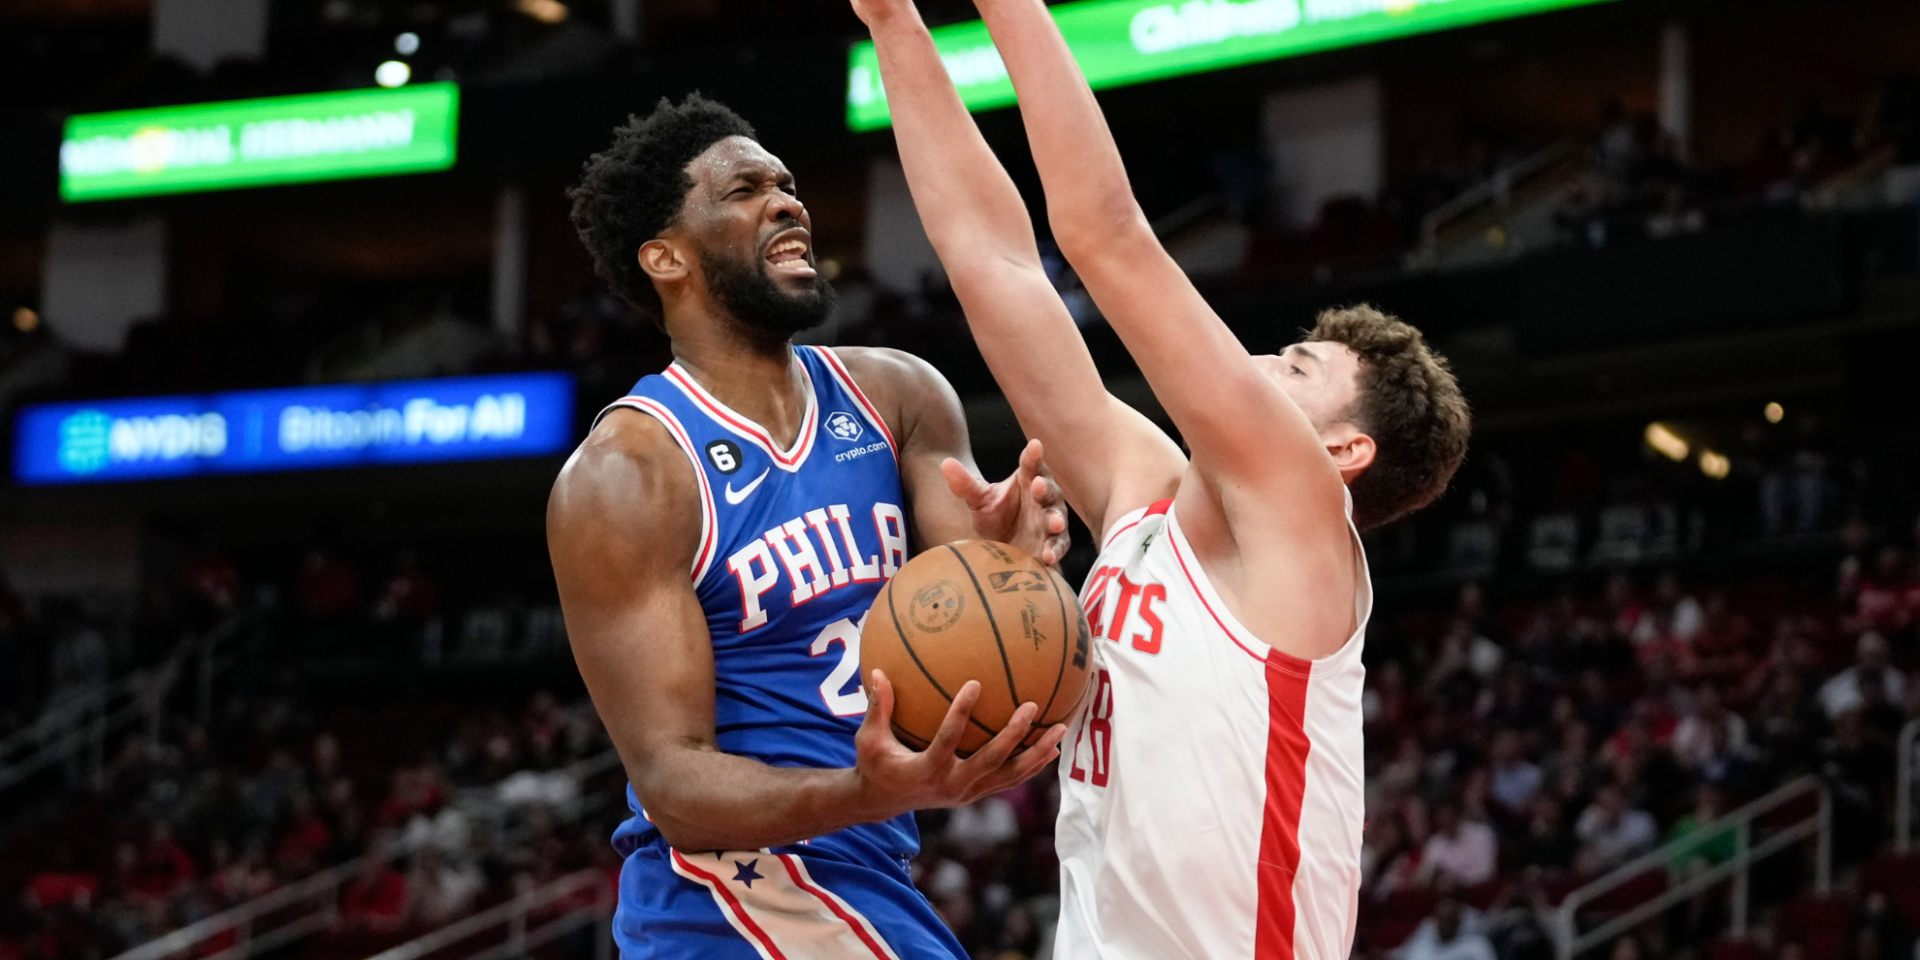 The next Rockets superteam could be just around the corner -- if Joel Embiid asks out of Philadelphia